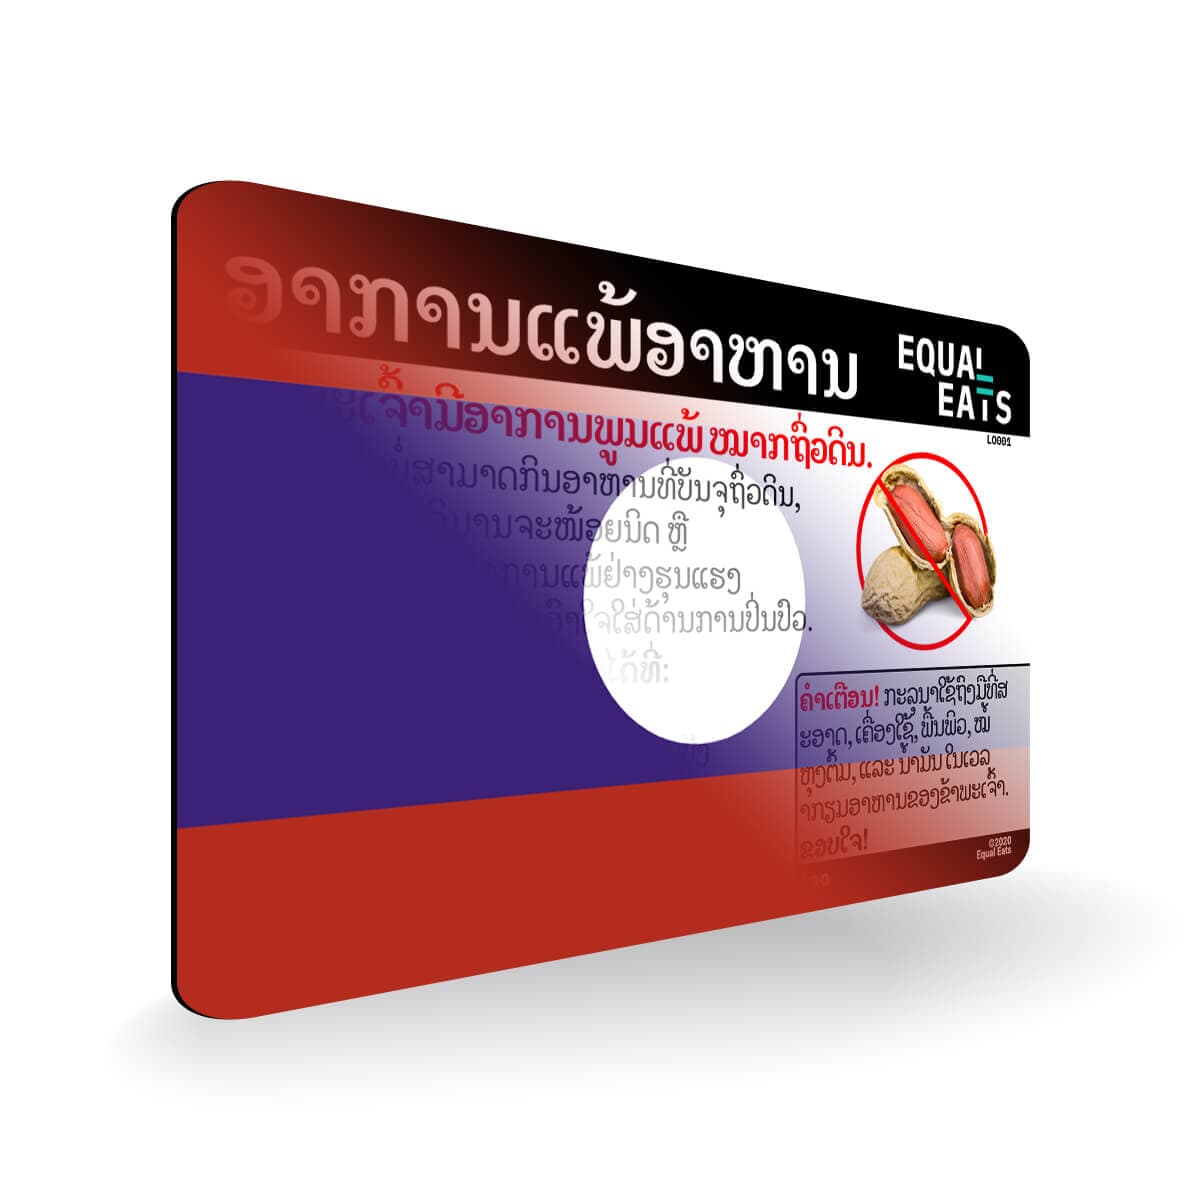 Peanut in Laos Allergy Card by Equal Eats